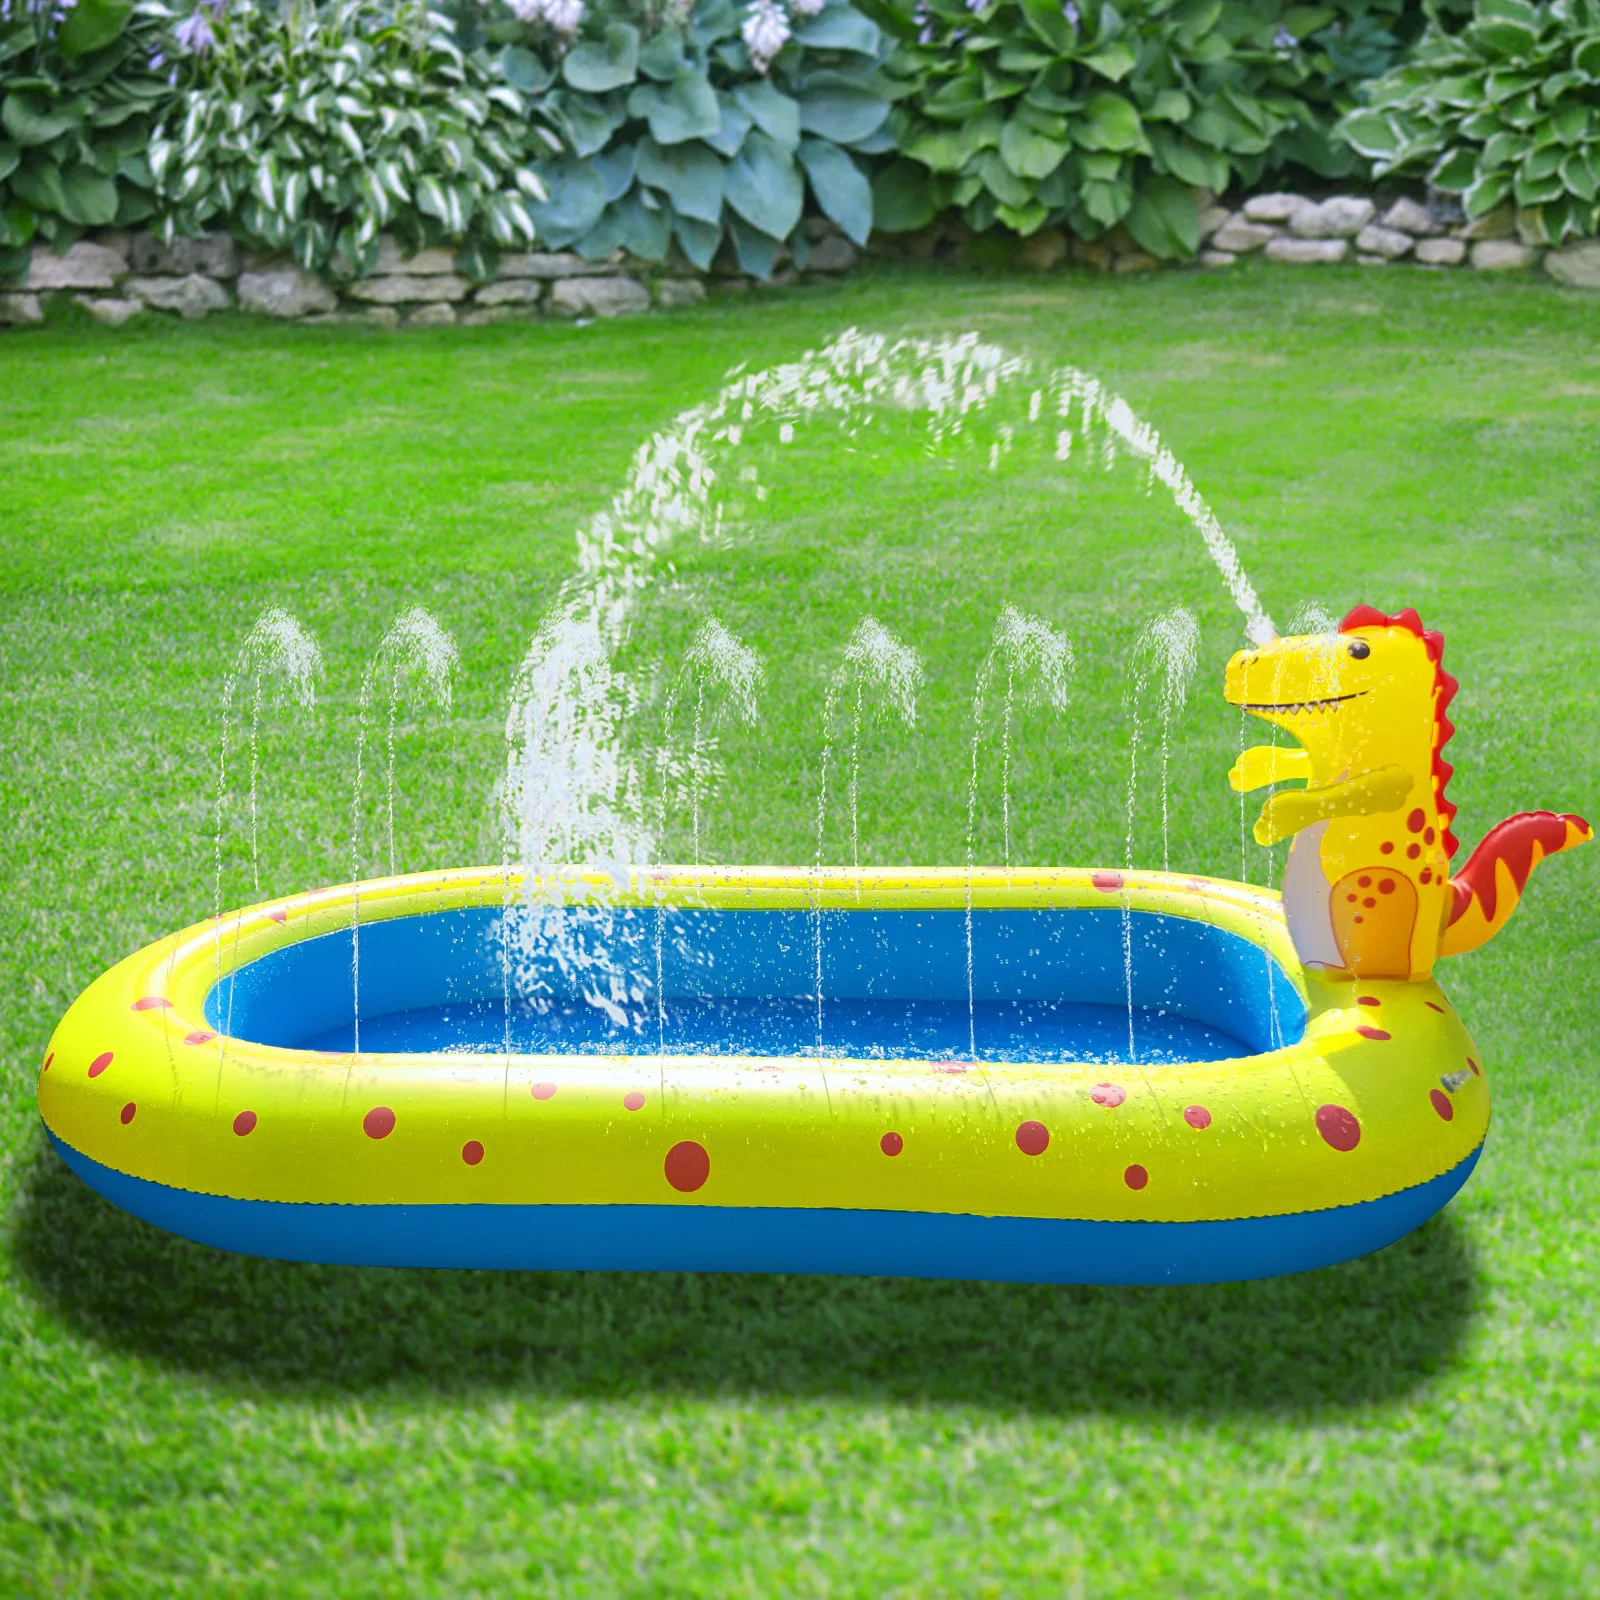 

170cm PVC Inflatable mini kids plastic Swimming Pool for kids Dinosaur Fountain Outdoor Sprinkler Play Mat Children's Water Toy, Customized color